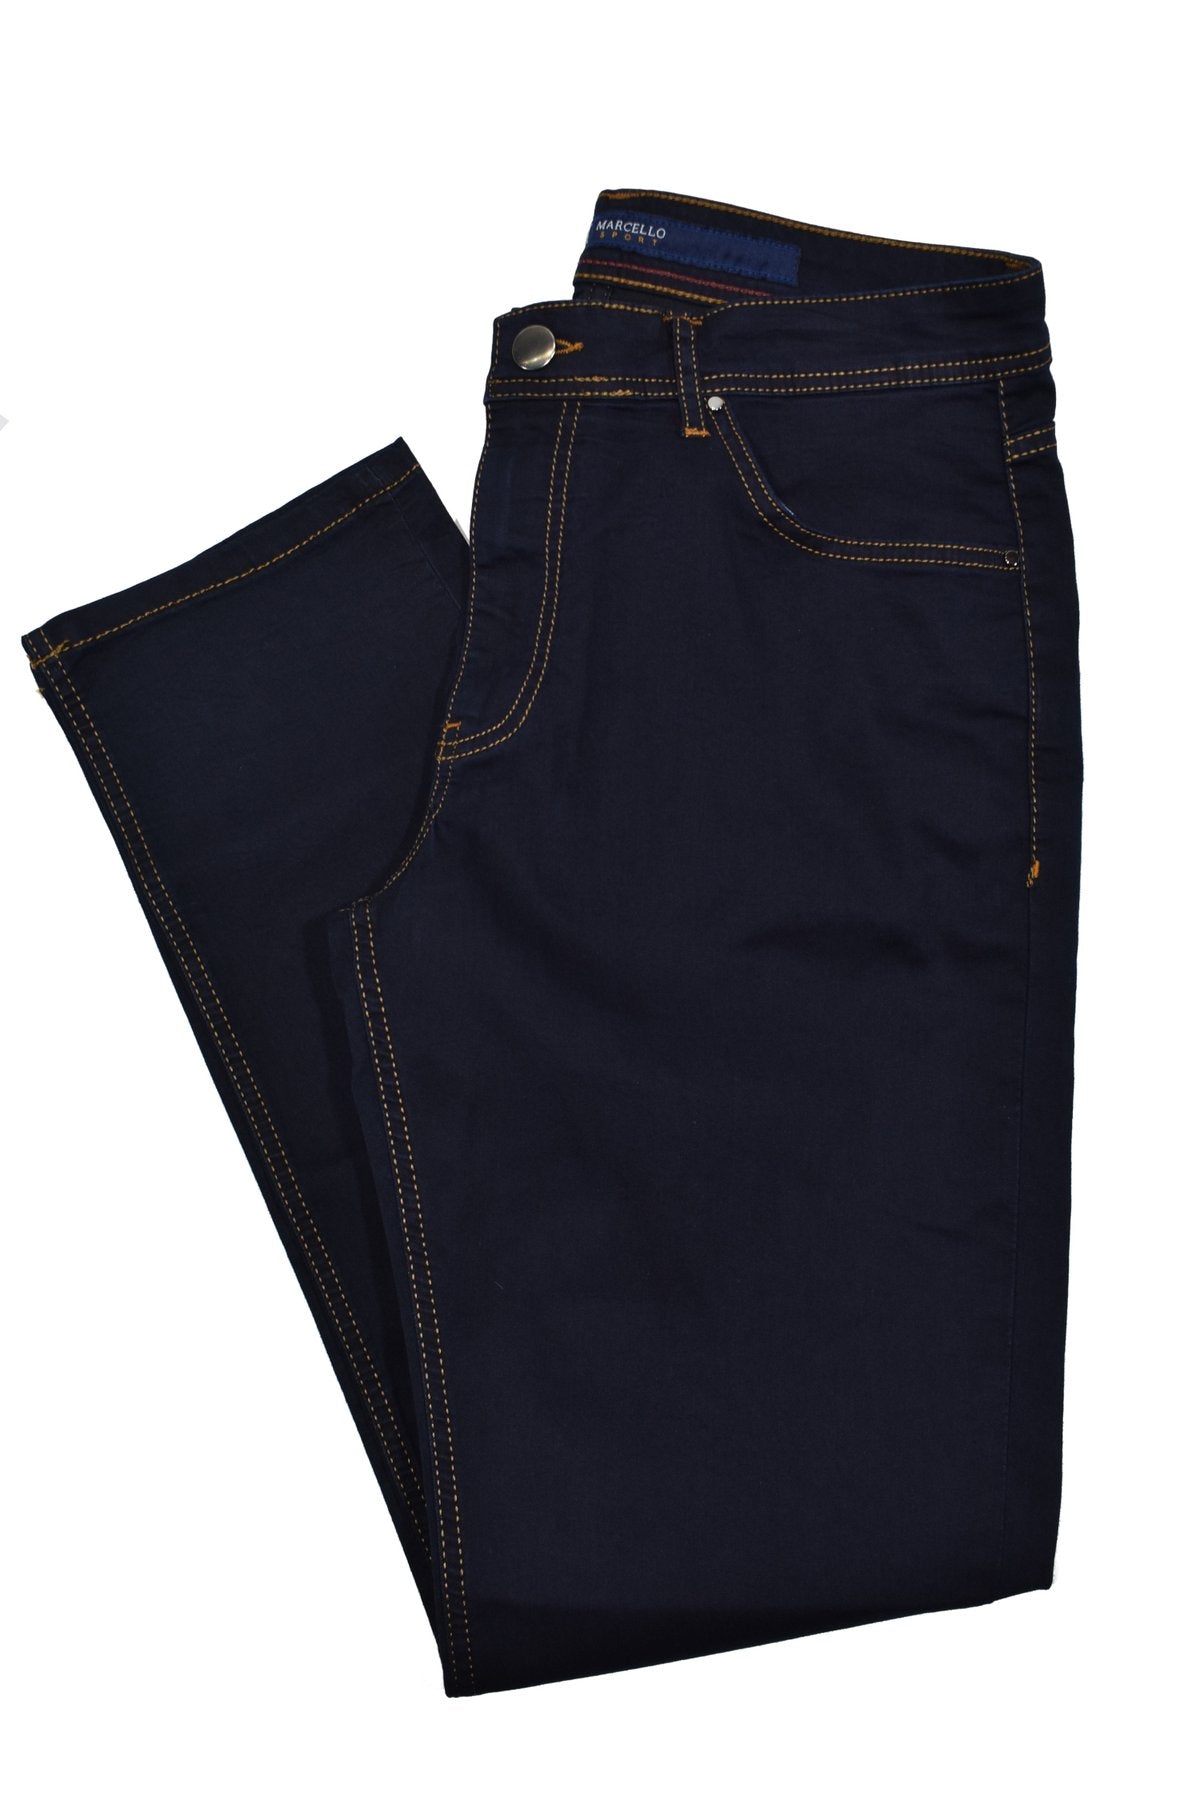 Stay comfortable and stylish with the LP10 Marcello Feather Weight Stretch Jeans. The lightweight design combined with stretch fabric makes them ideal for natural movements. The medium rise and classic fit are updated with a tapered leg, perfect for contemporary looks. Choose from Black, Denim and Navy, in sizes 30-35 (32 length) or 36-44 (33 length).